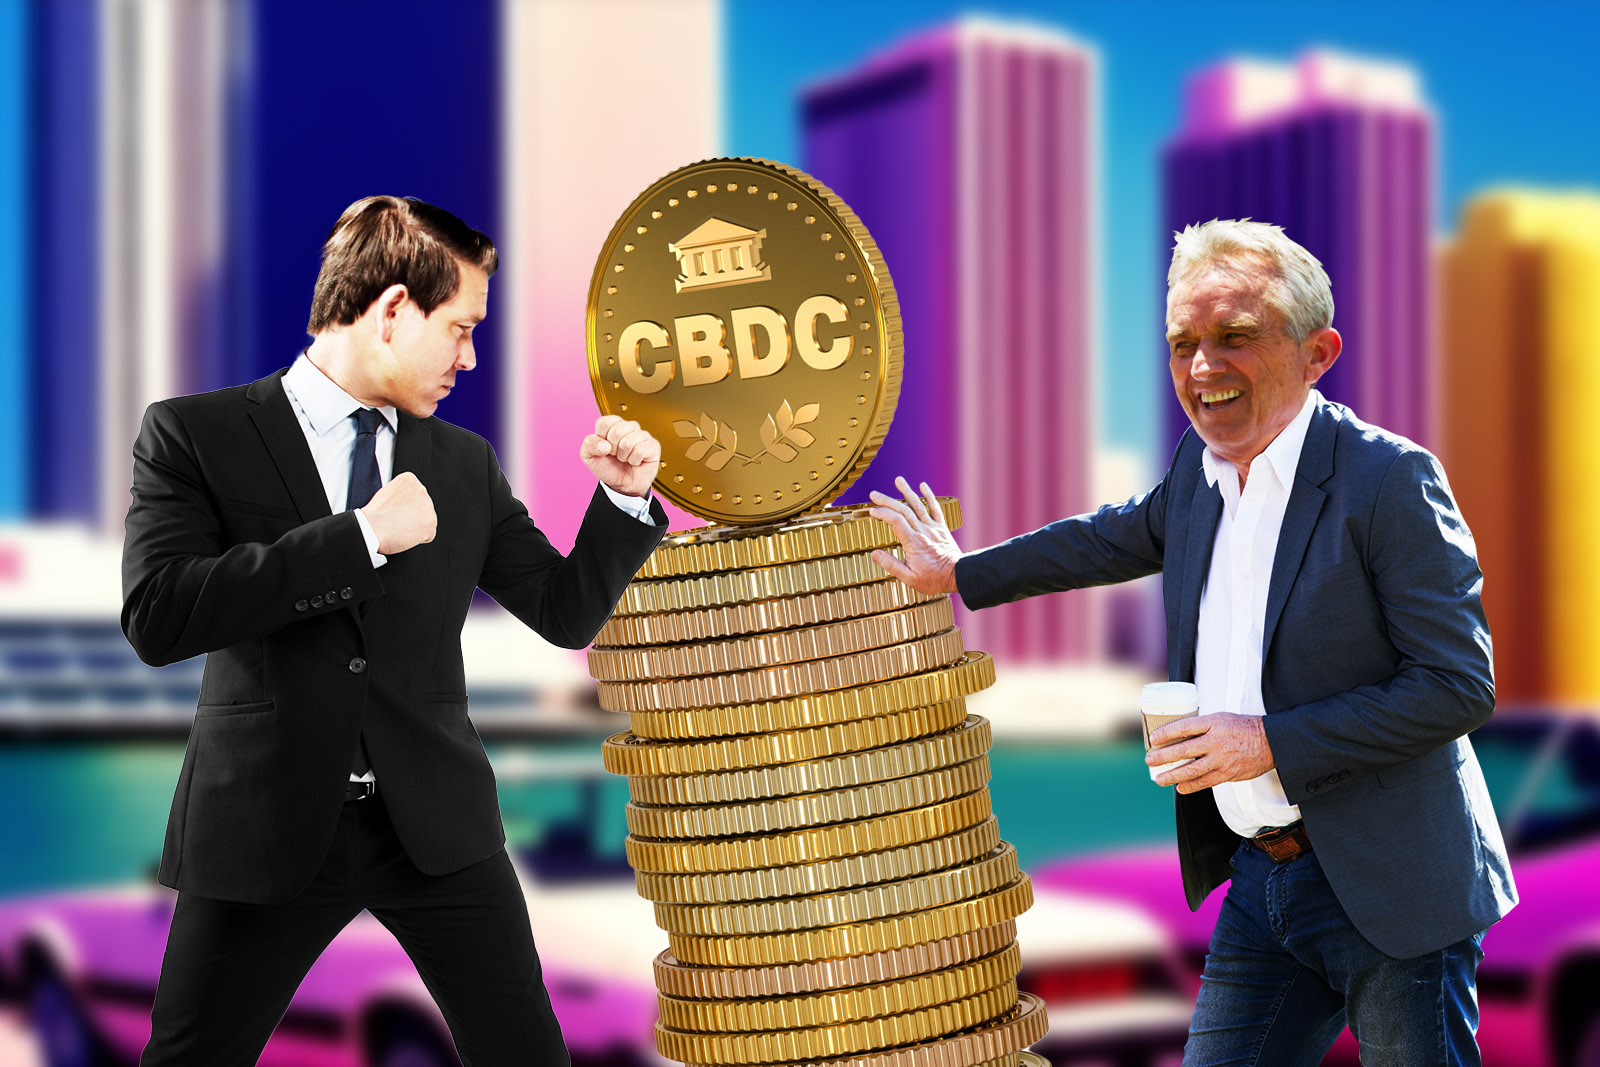 Kennedy Jr. pushing over a stack of CBDC coins from one side, whilst Ron DeSantis is ready to fight the coins from the other side.